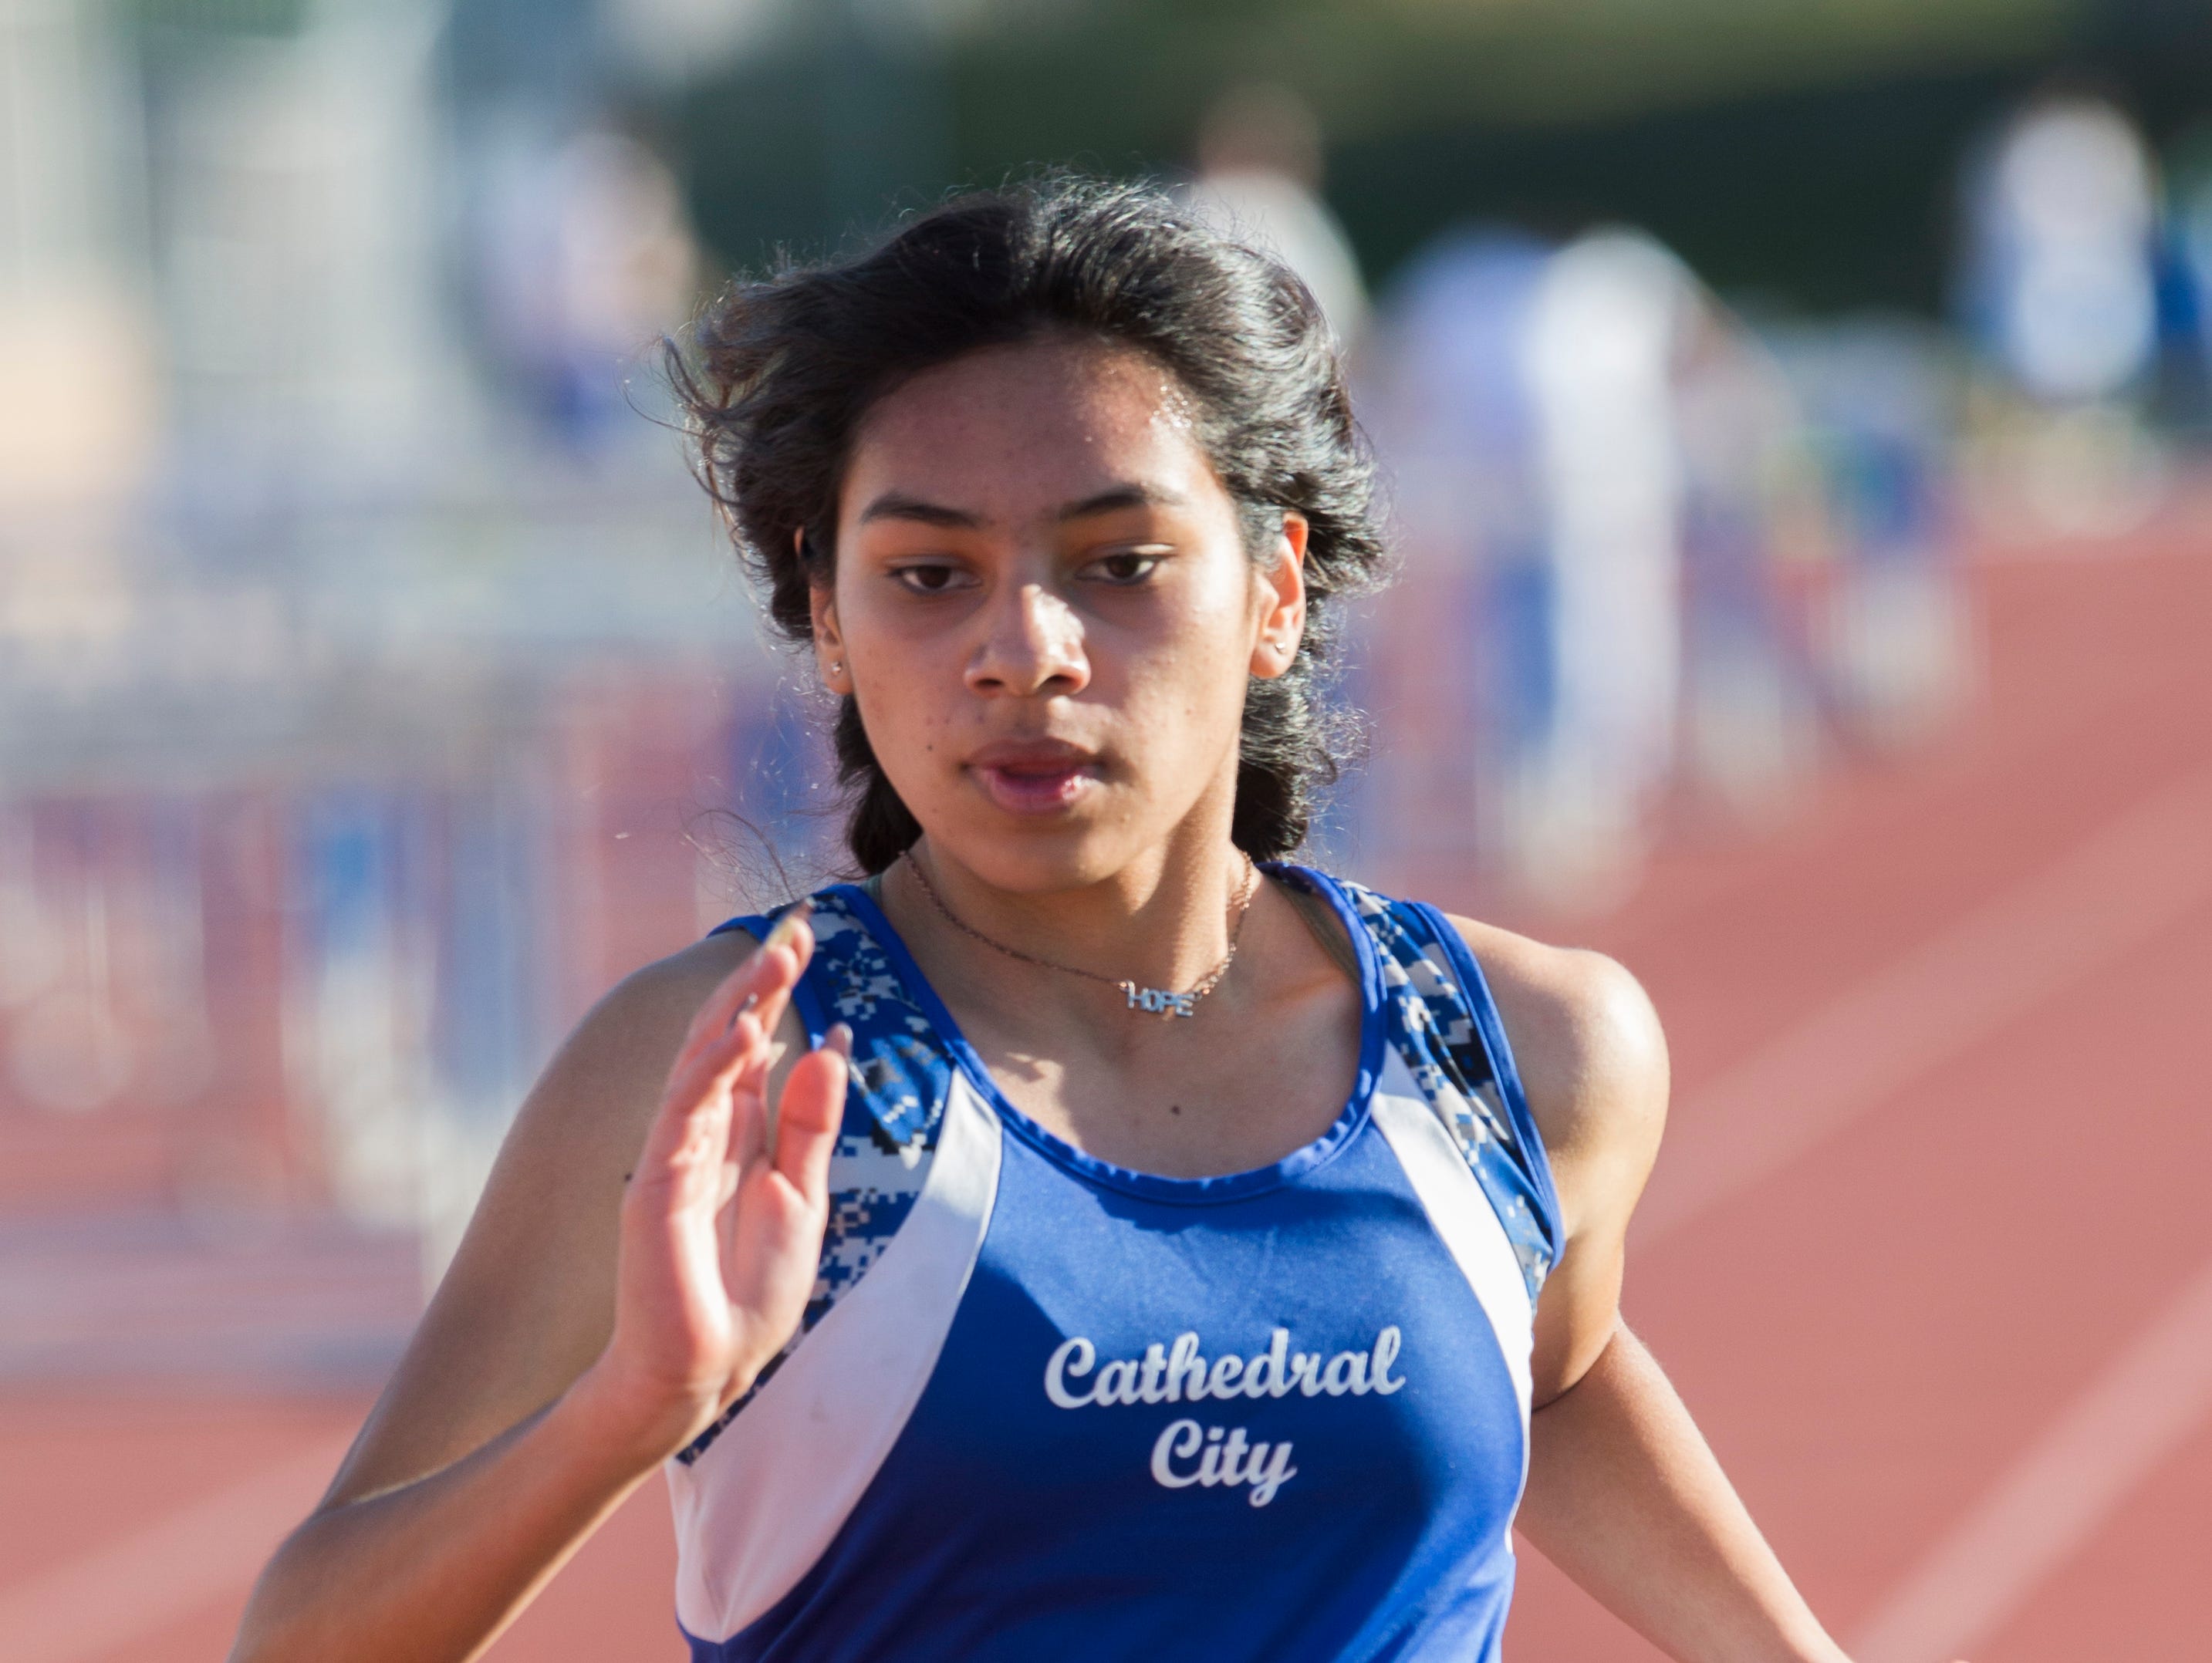 Cathedral City High School's Stephany Ramirez-Lopez finishes first in the 1600 meter race during her school's track meet at home against Desert Mirage High School and Desert Hot Springs High School.